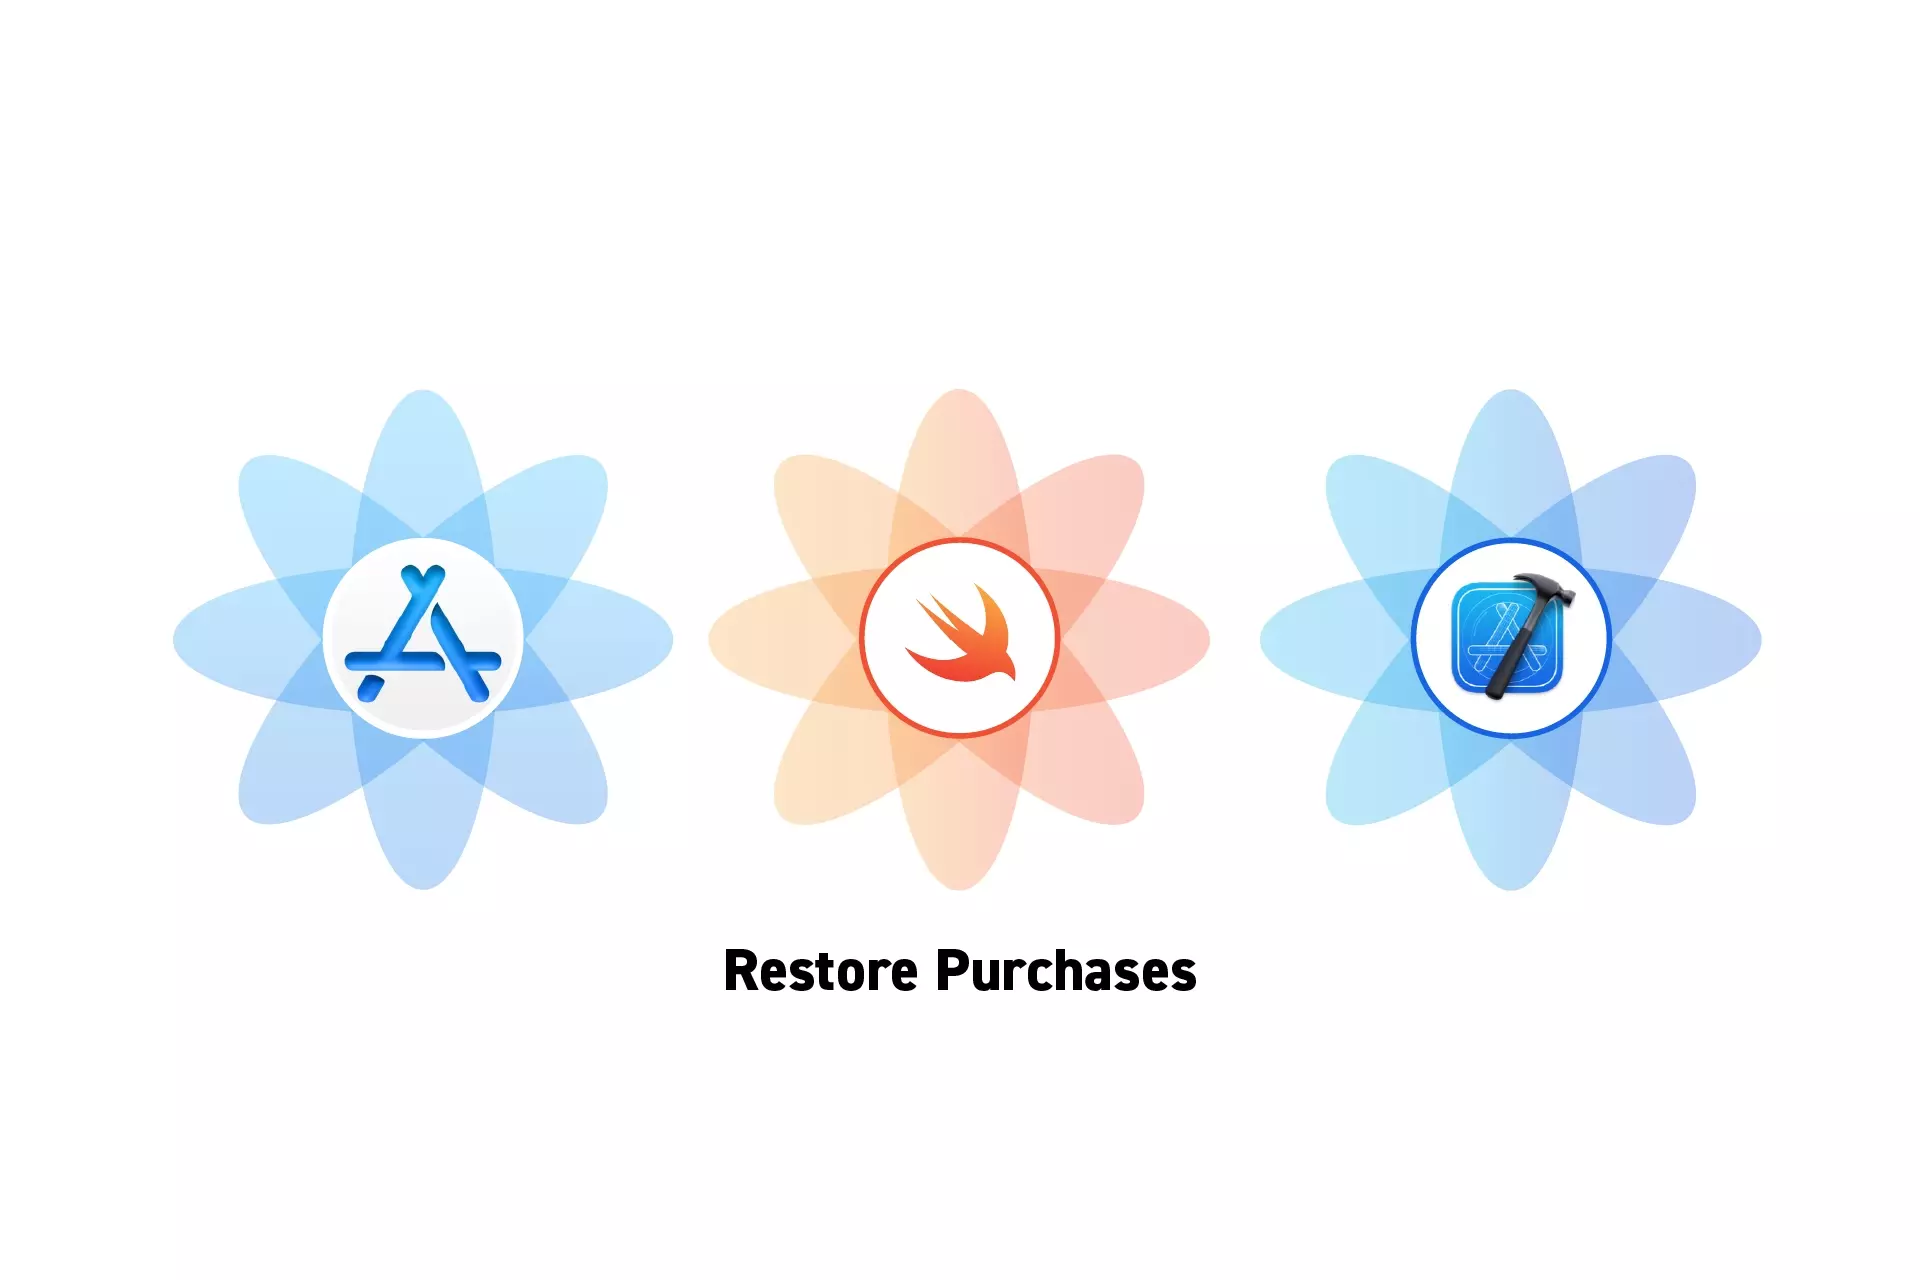 Three flowers that represent StoreKit, Swift and XCode side by side. Beneath them sits the text “Restore Purchases.”